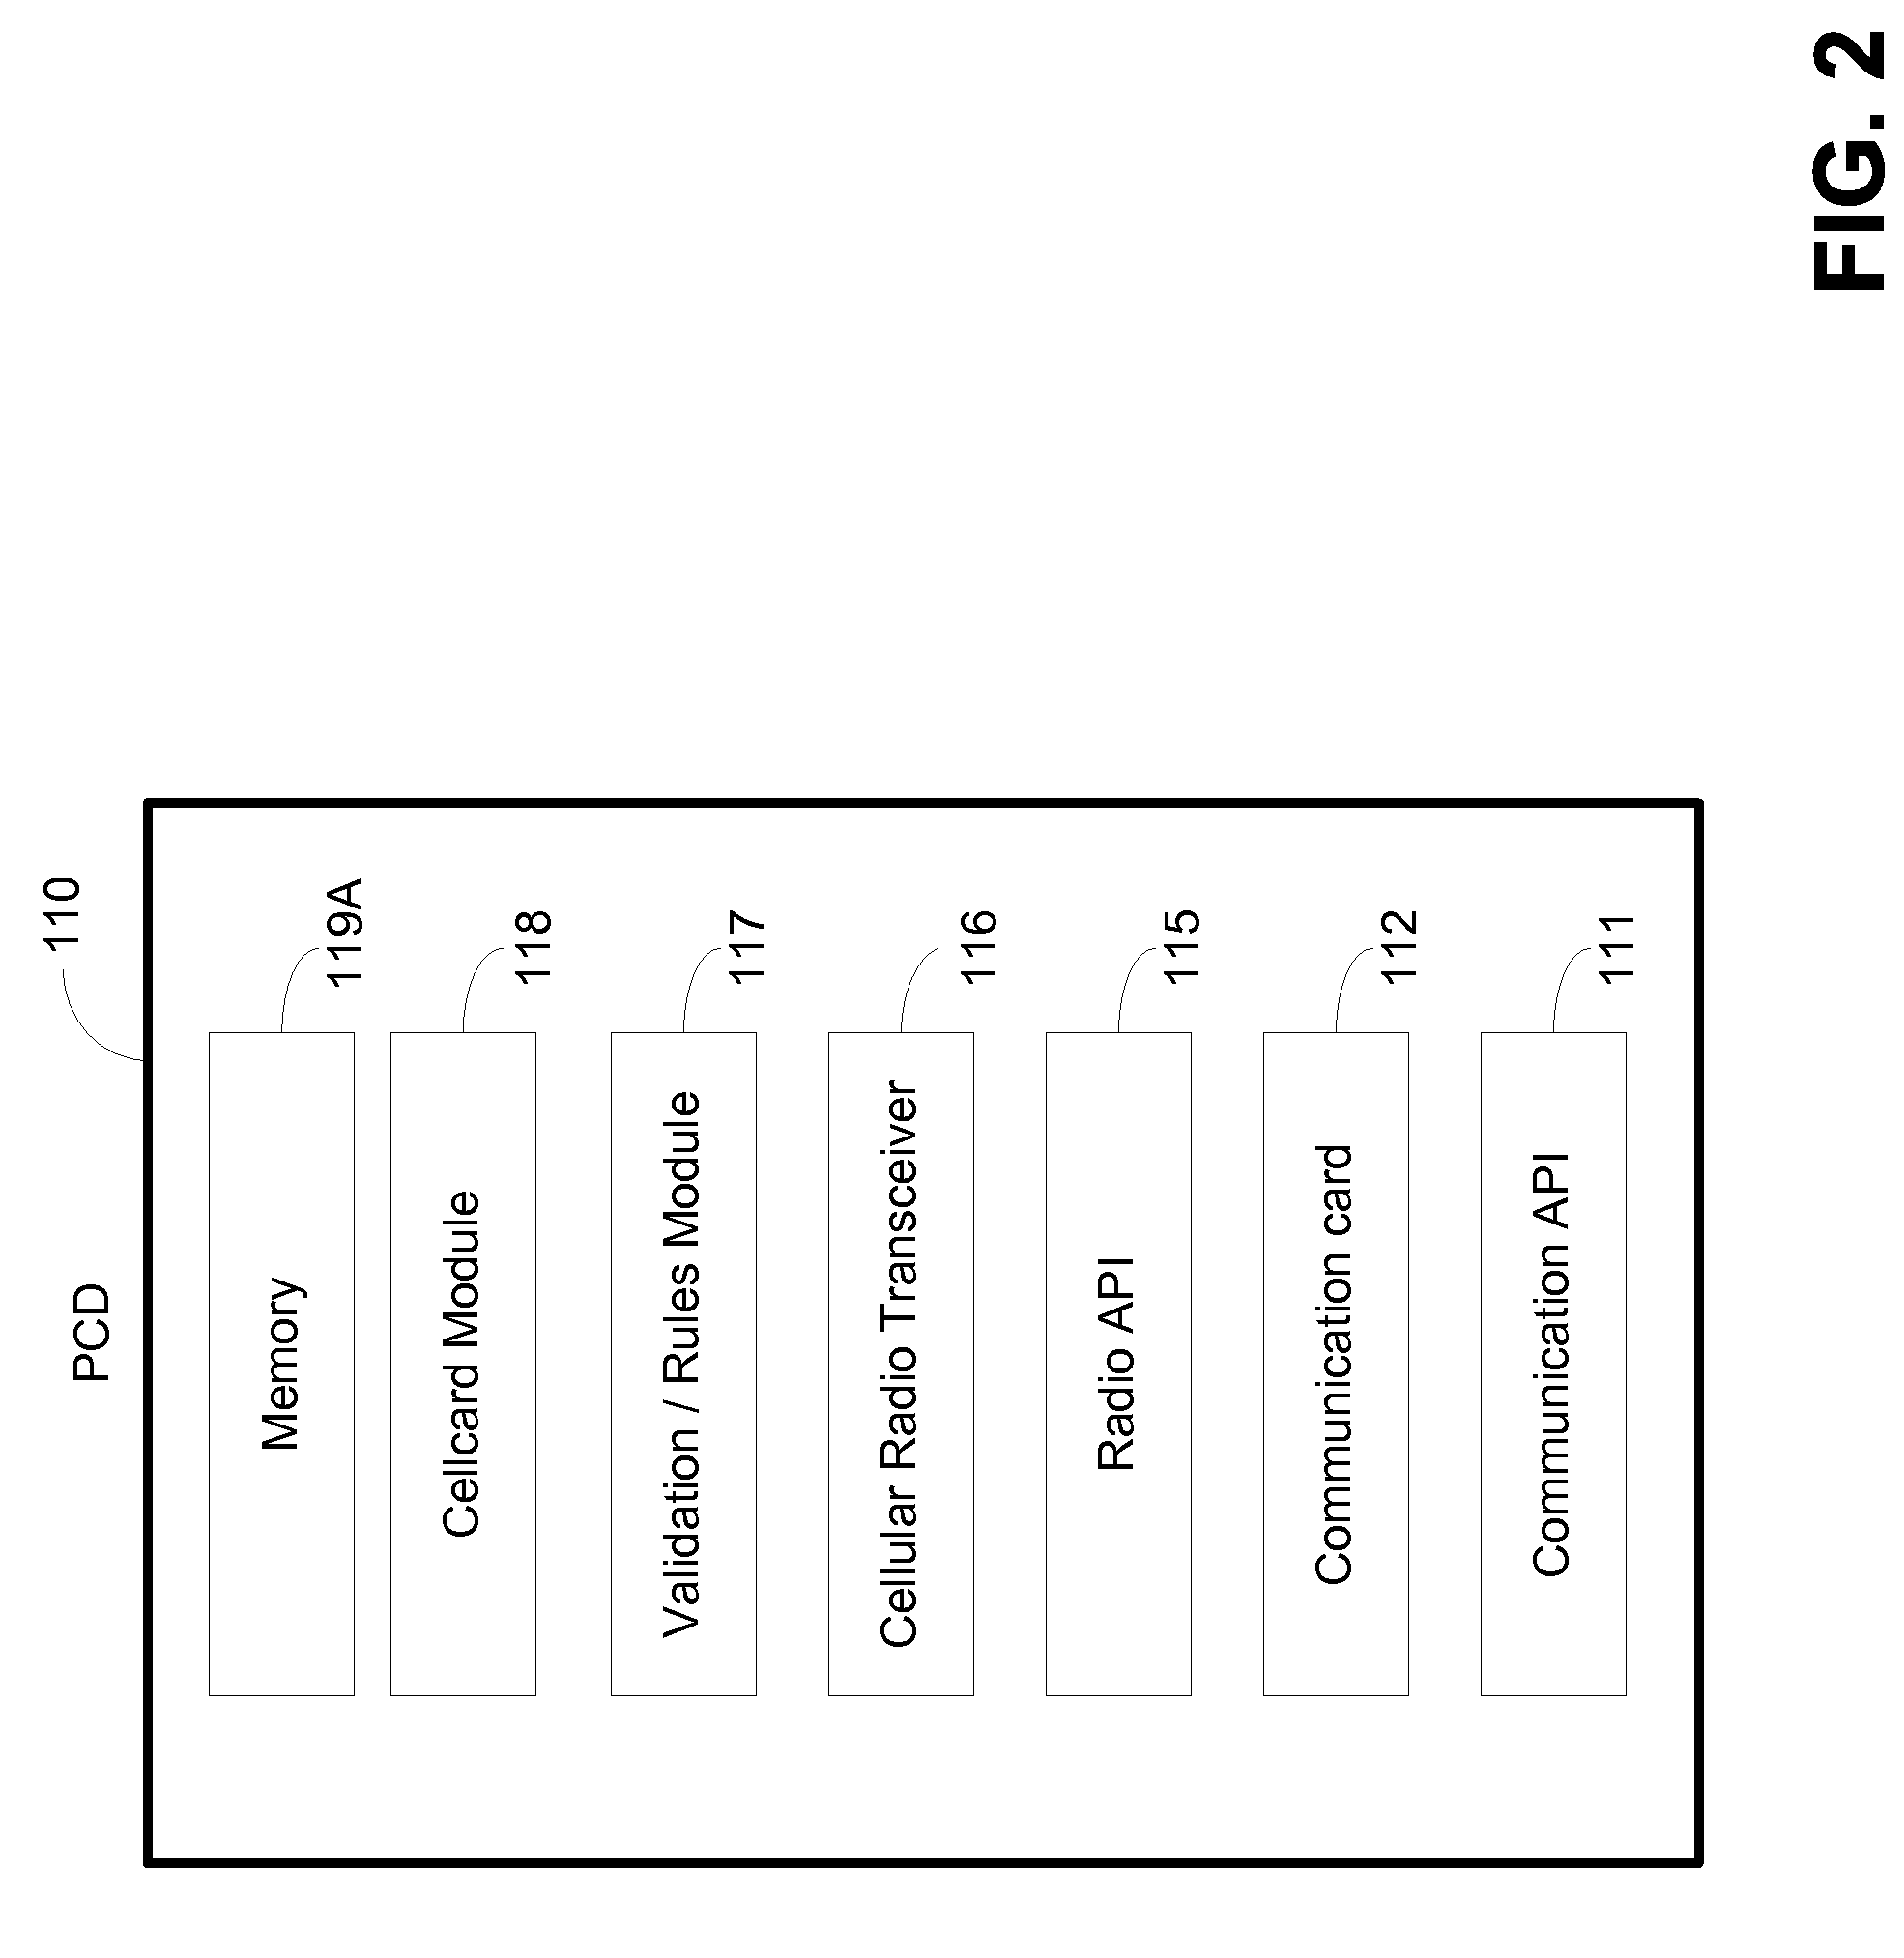 System and method for presentment of nonconfidential transaction token identifier